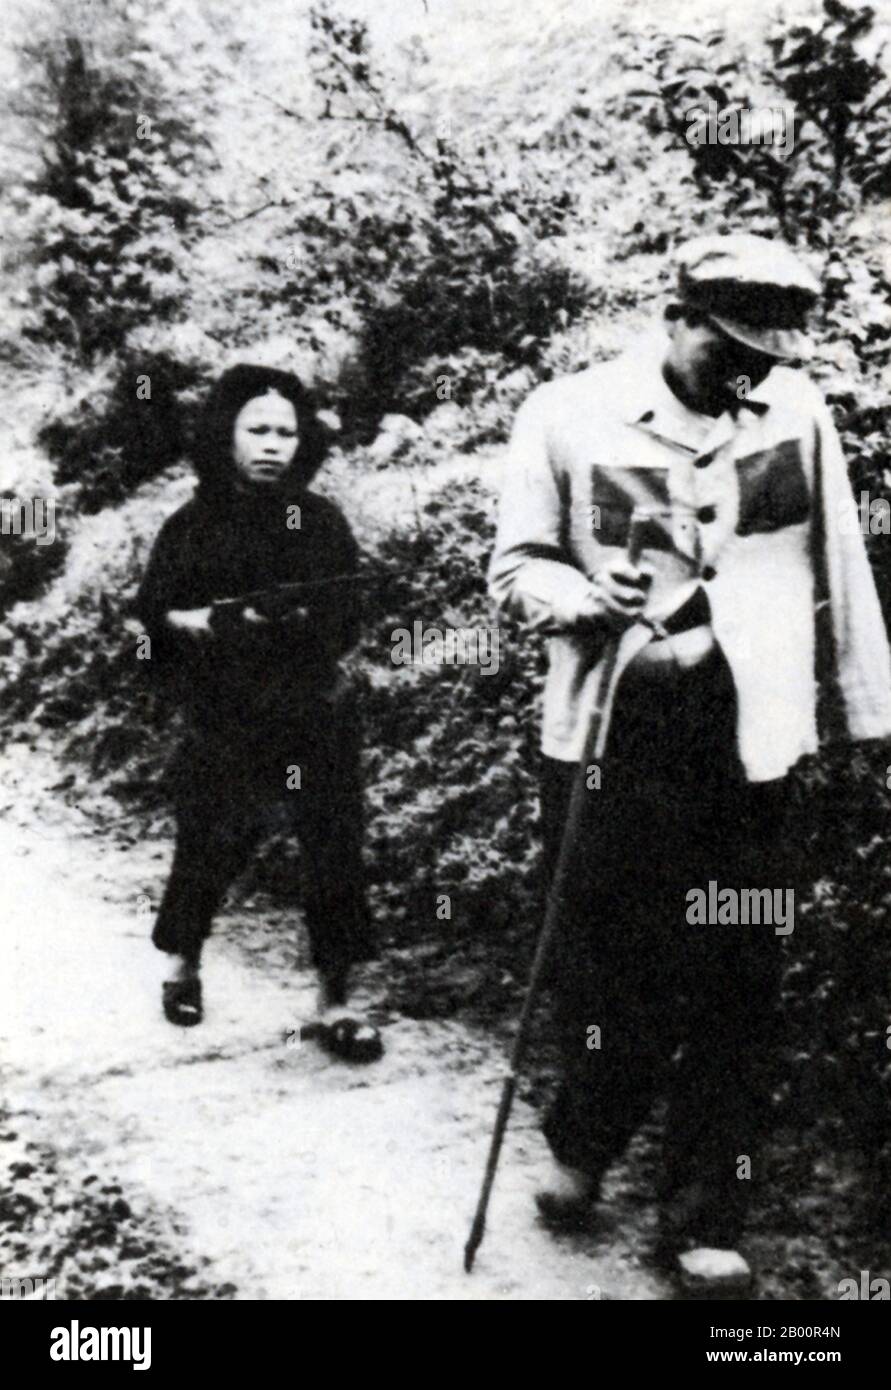 Vietnam: A female Vietnamese militia woman drives a captured Chinese PLA soldier ahead of her during the 1979 Chinese invasion of Vietnam.  A female Vietnamese militia woman drives a captured Chinese PLA soldier ahead of her during the 1979 Chinese invasion of Vietnam (the Third Indochina War). The image is strikingly (and perhaps deliberately) reminiscent of a similar photograph from the Second Indochina War showing a large American pilot being driven by a tiny Vietnamese female soldier. Stock Photo